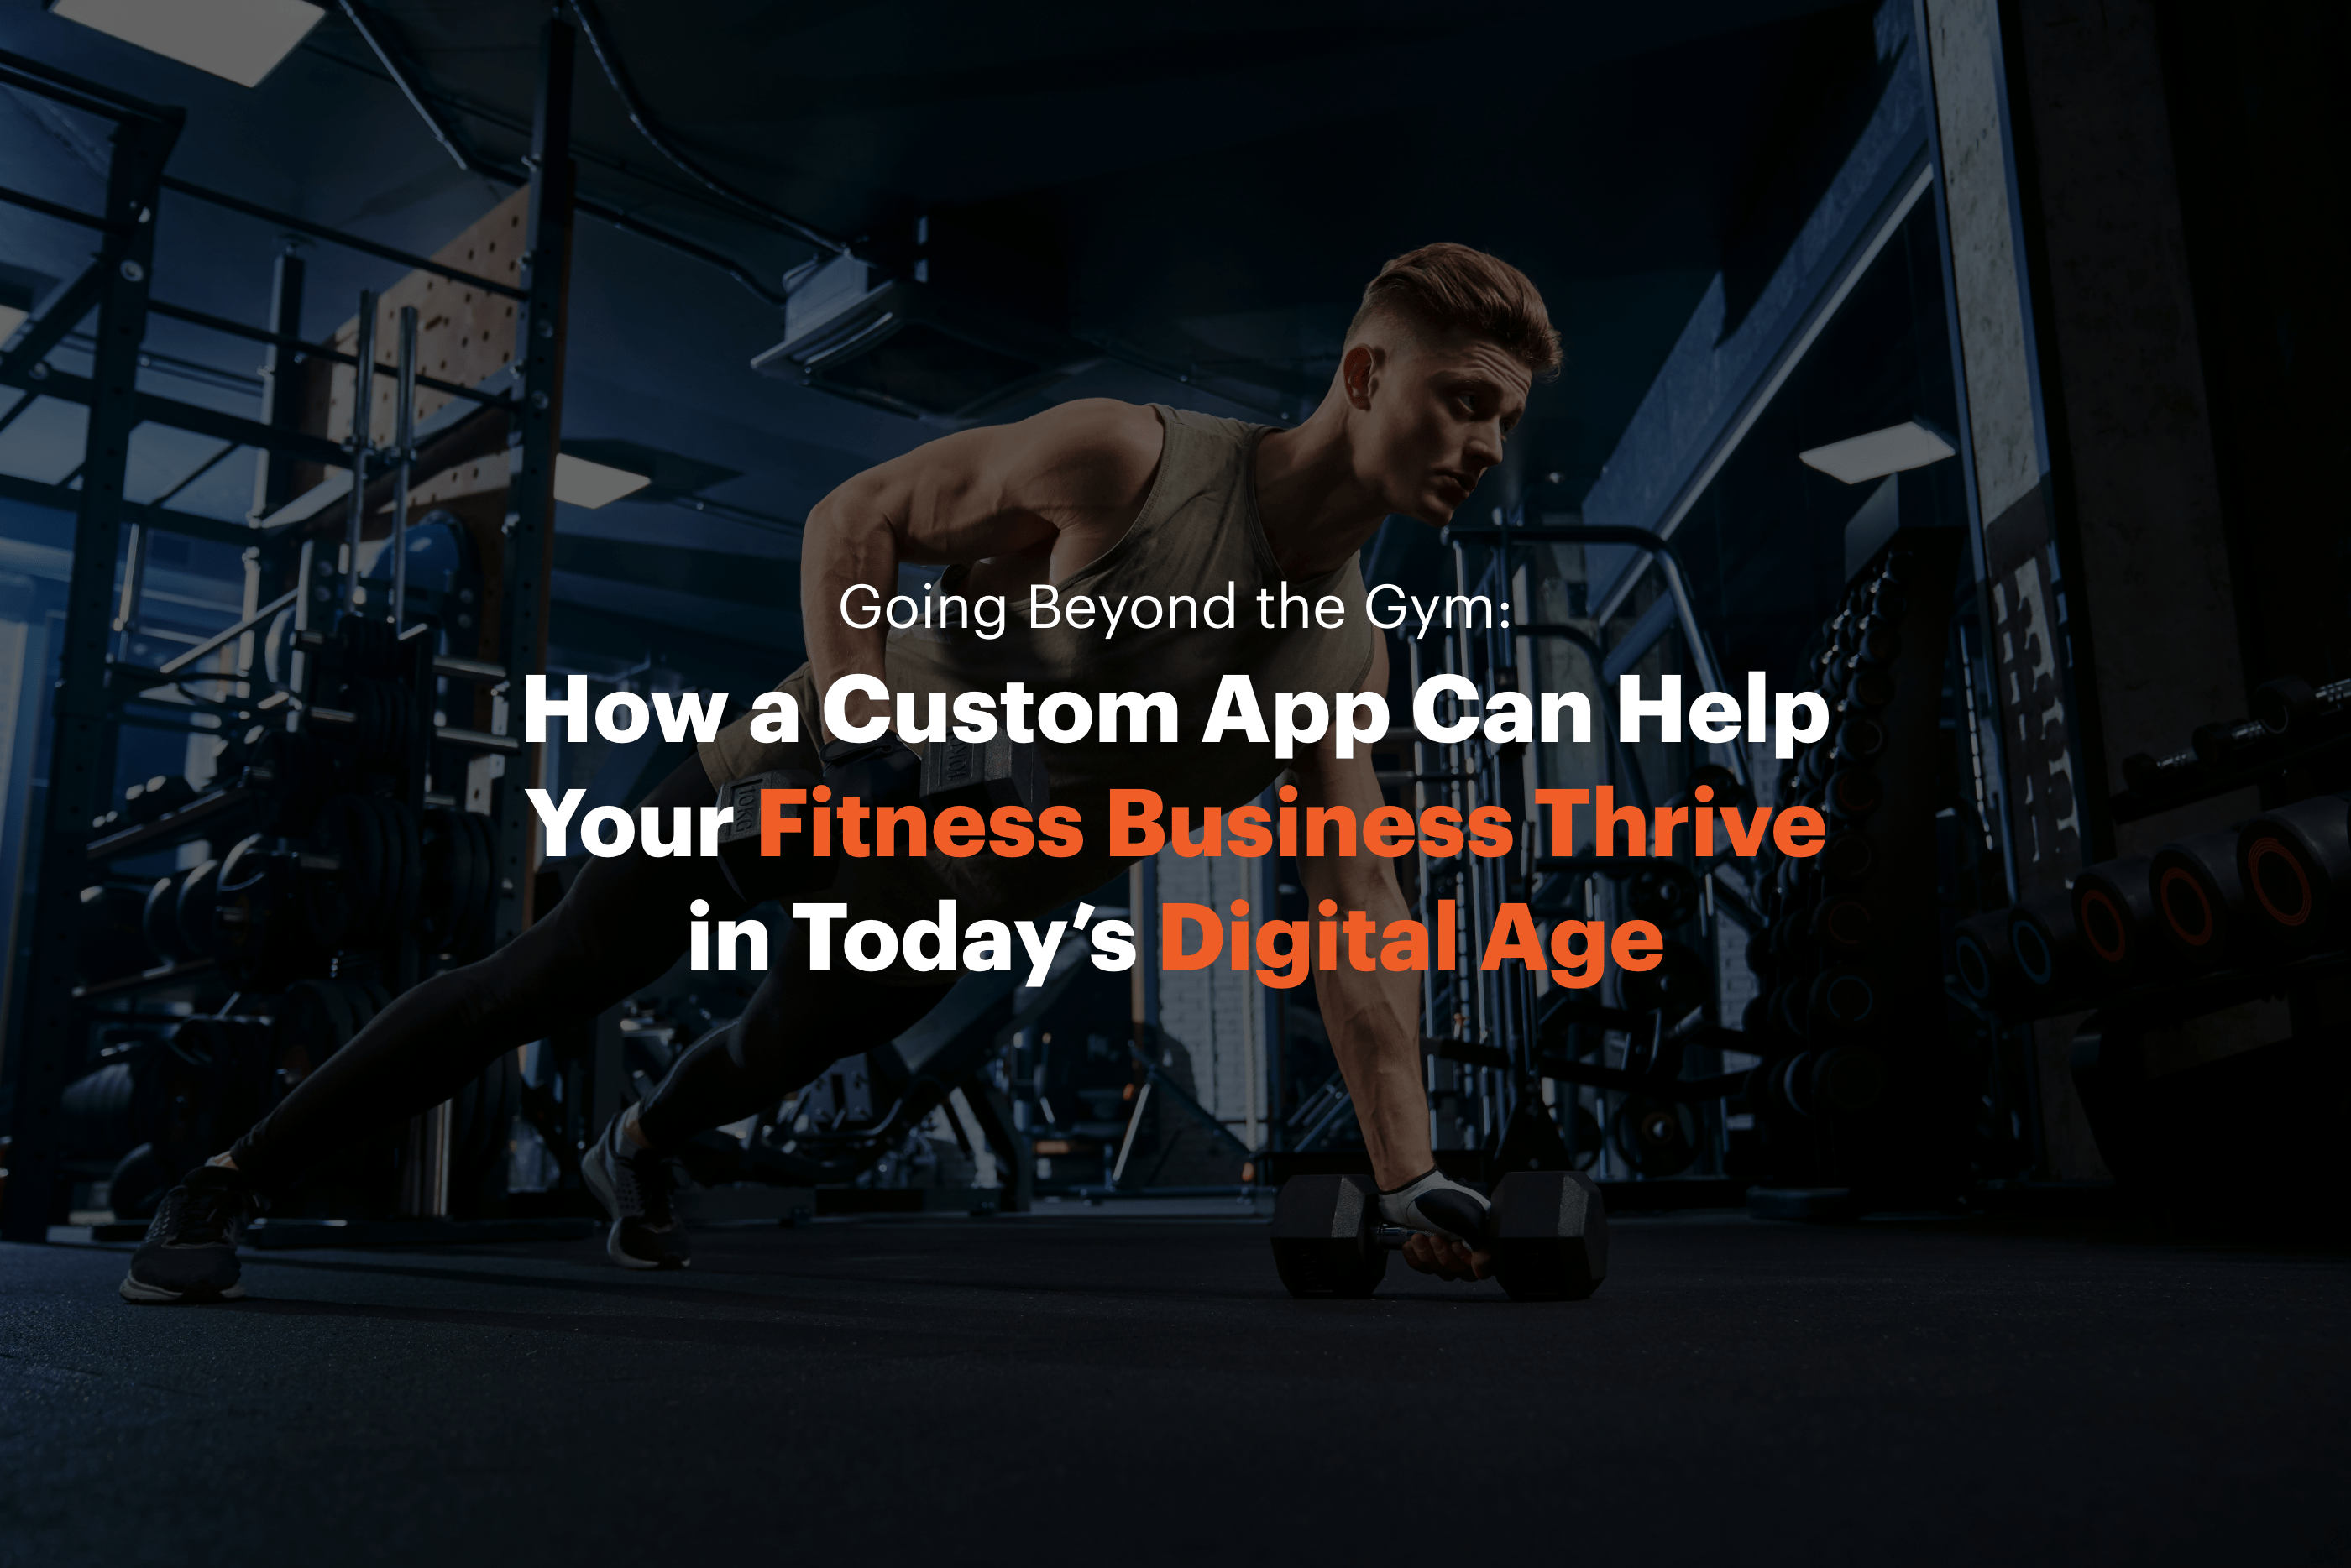 Going Beyond the Gym: How a Custom App Can Help Your Fitness Business Thrive in Today's Digital Age